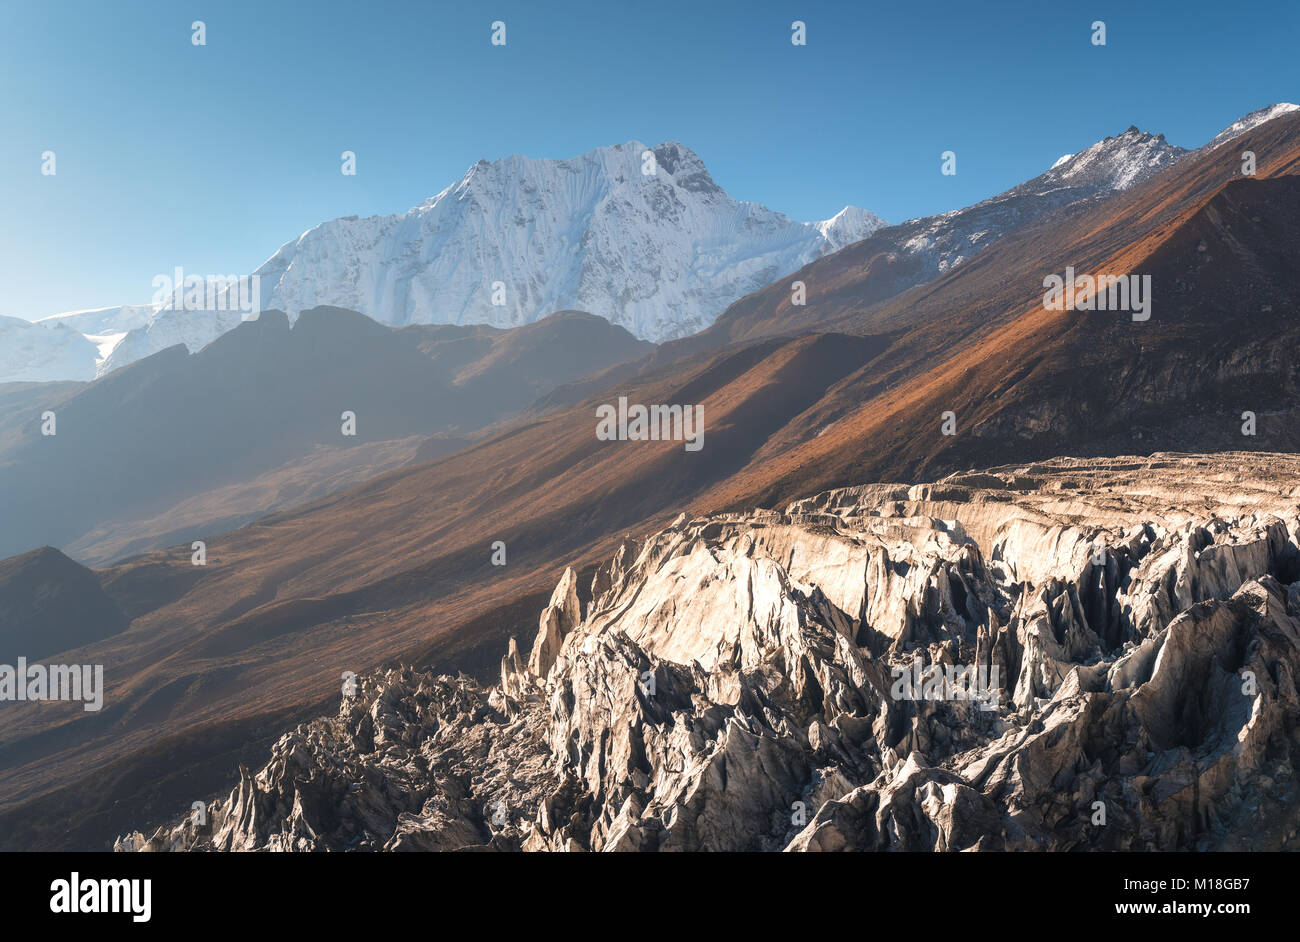 Beautiful view of snow-covered mountain against blue sky at sunrise in Nepal. Landscape with snowy peaks of Himalayan mountains, glacier, rocks, hills Stock Photo